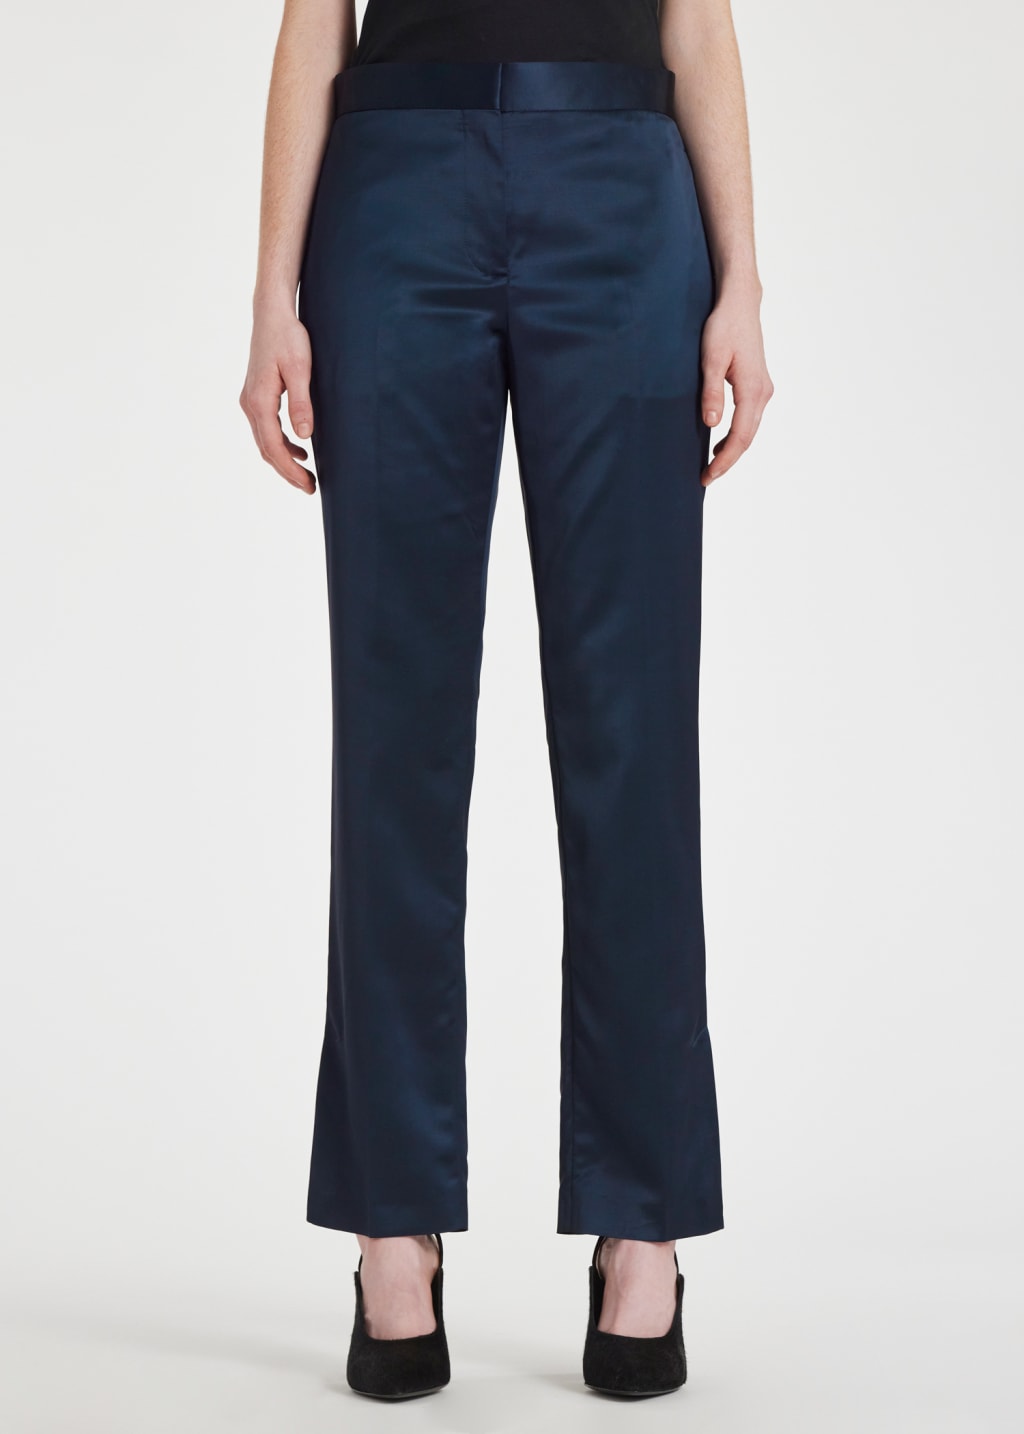 Model View - Women's Navy Satin Kick Flare Trousers by Paul Smith